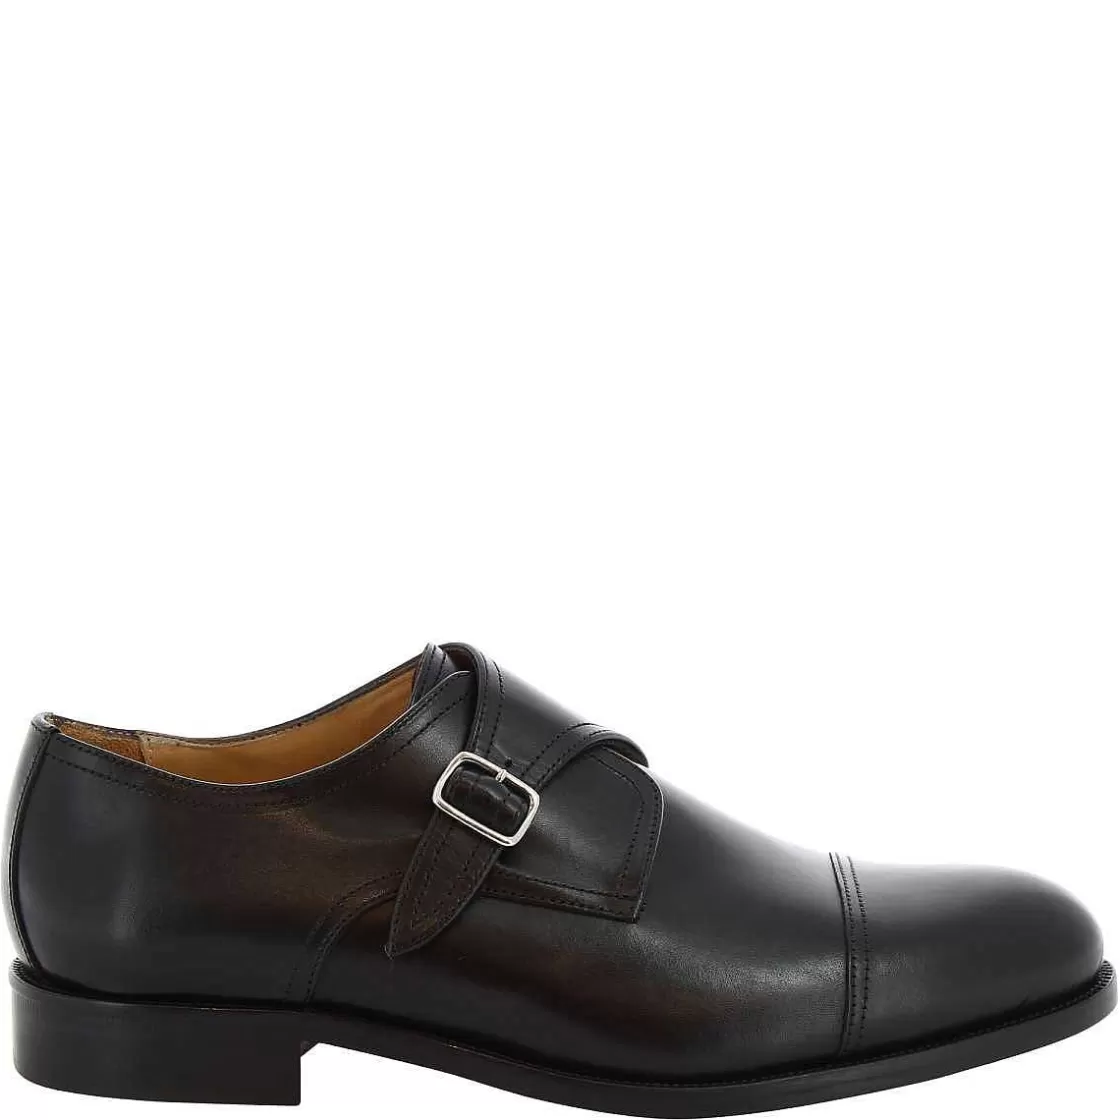 Leonardo Men'S Handmade Shoes In Black Leather With Buckle Closure Outlet